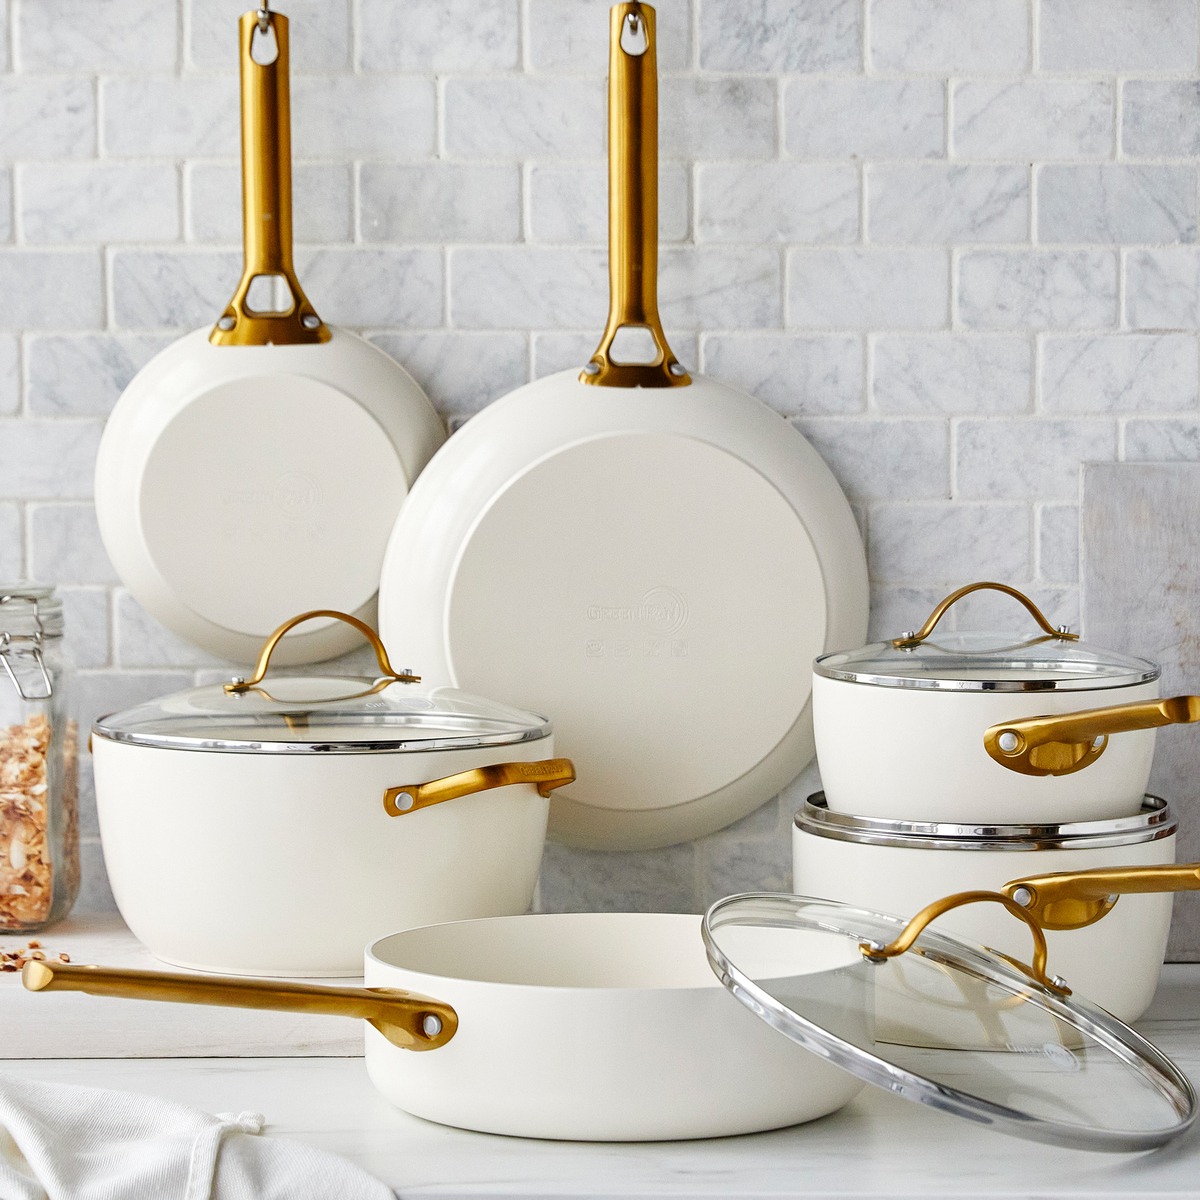  - Shop by Category - Cookware Sets